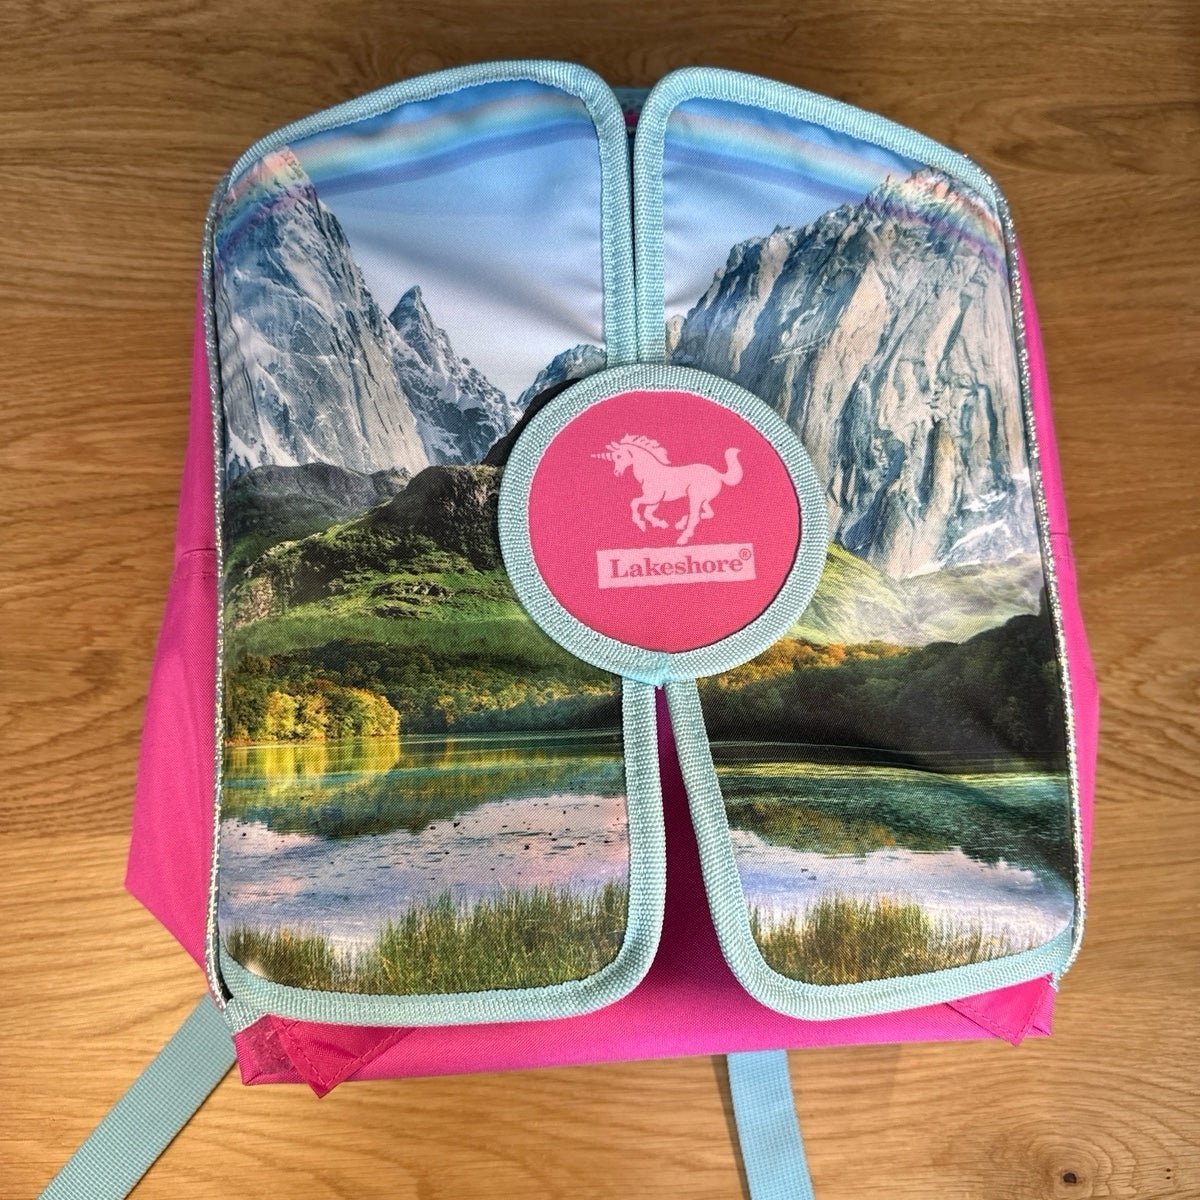 Fantasy Adventure Backpack HQE7yyC0R